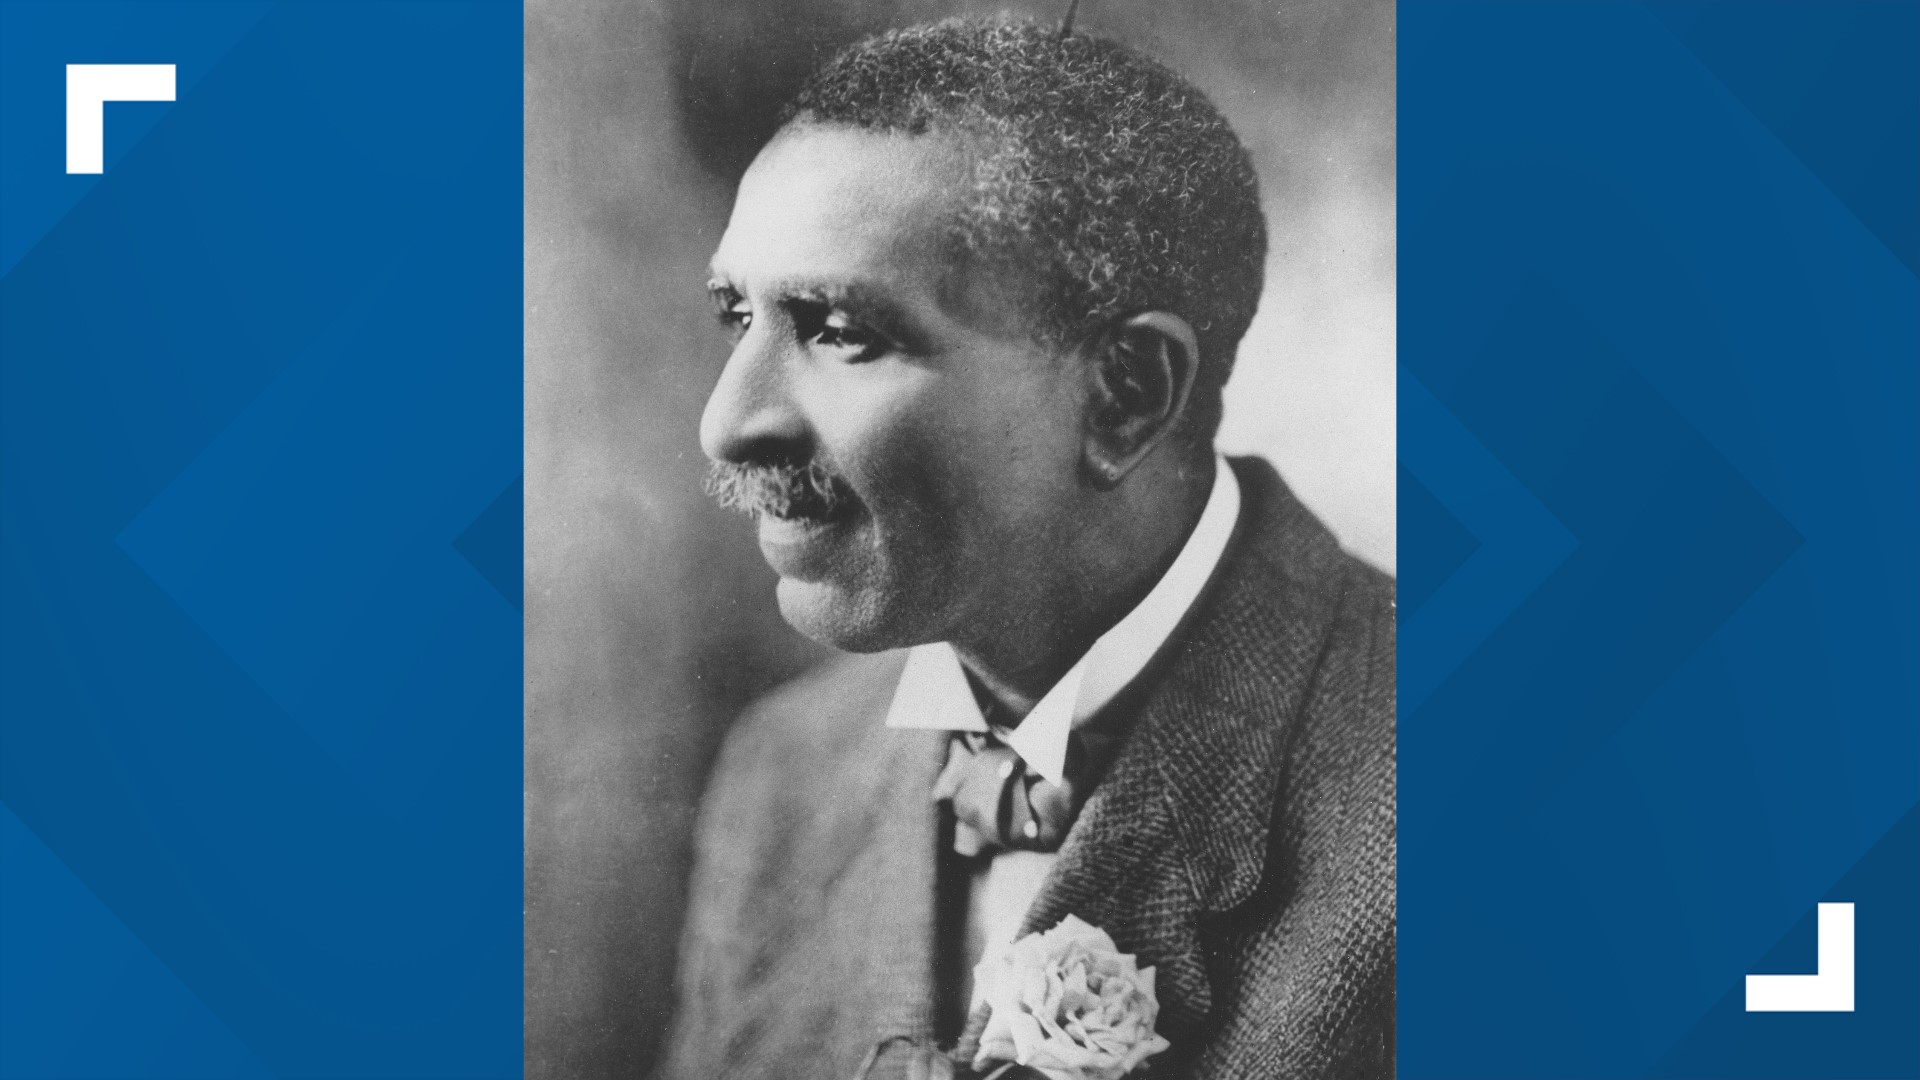 In June 2022, Governor Kim Reynolds signed legislation marking Feb. 1 of every following year as George Washington Carver Day in Iowa.